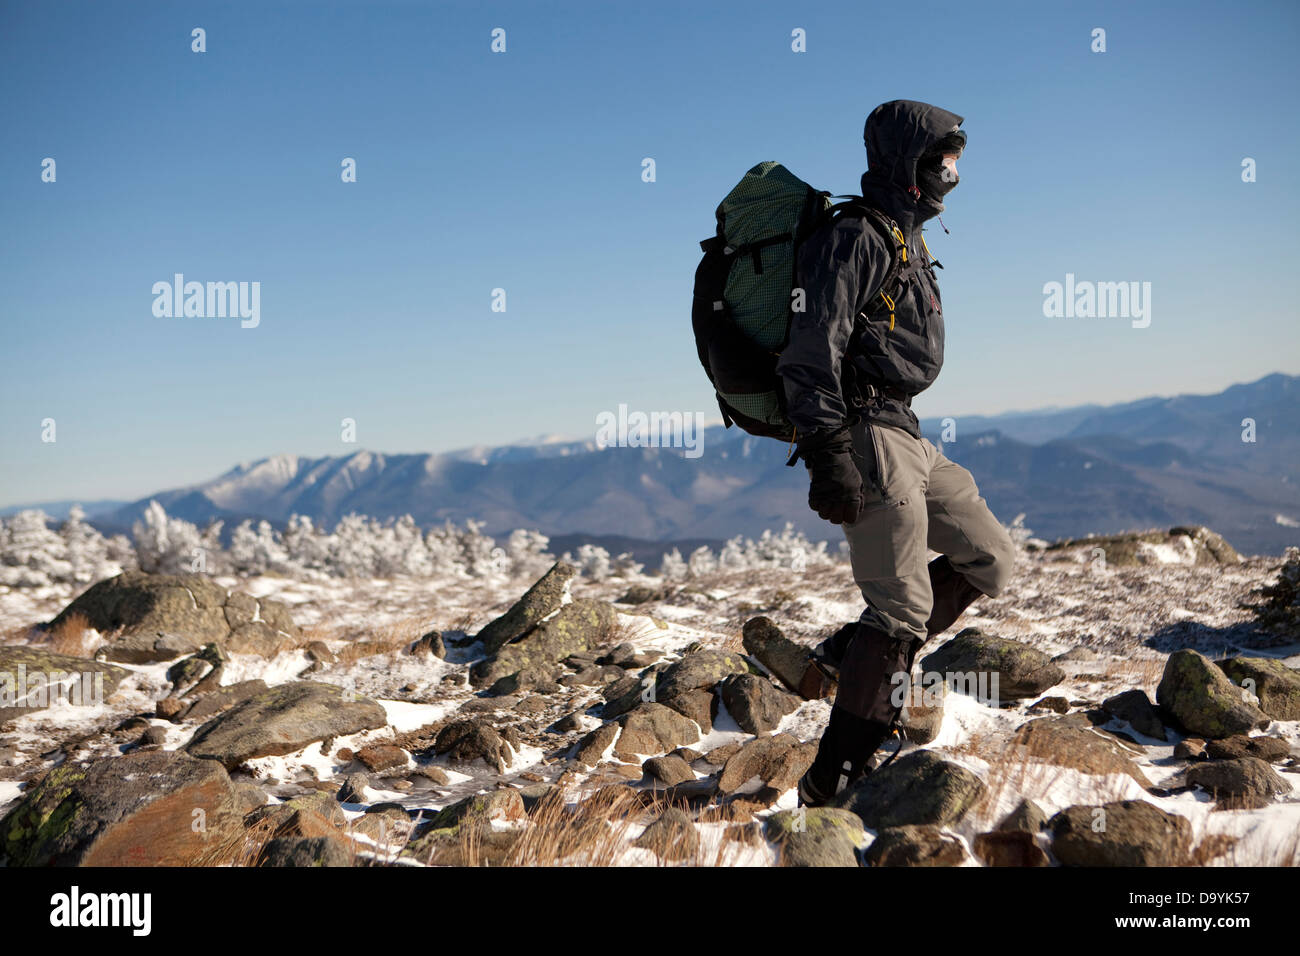 A climber descends from the summit of a peak in the White Mountains of New Hampshire. Stock Photo